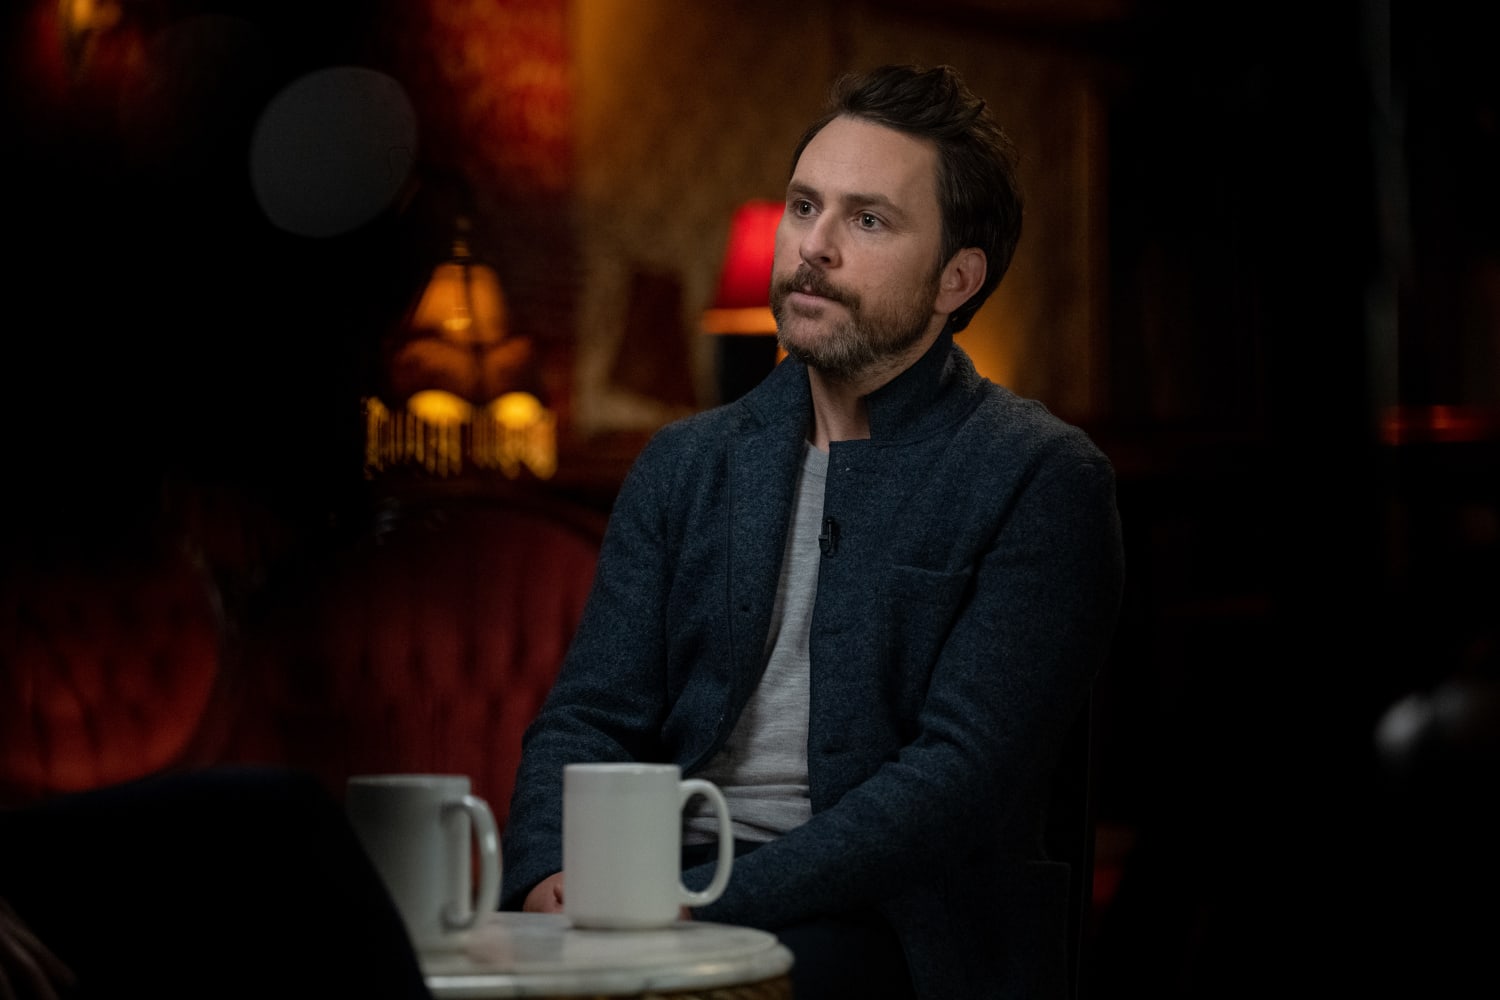 Charlie Day on 'Fool's Paradise,' Using 'It's Always Sunny' Co